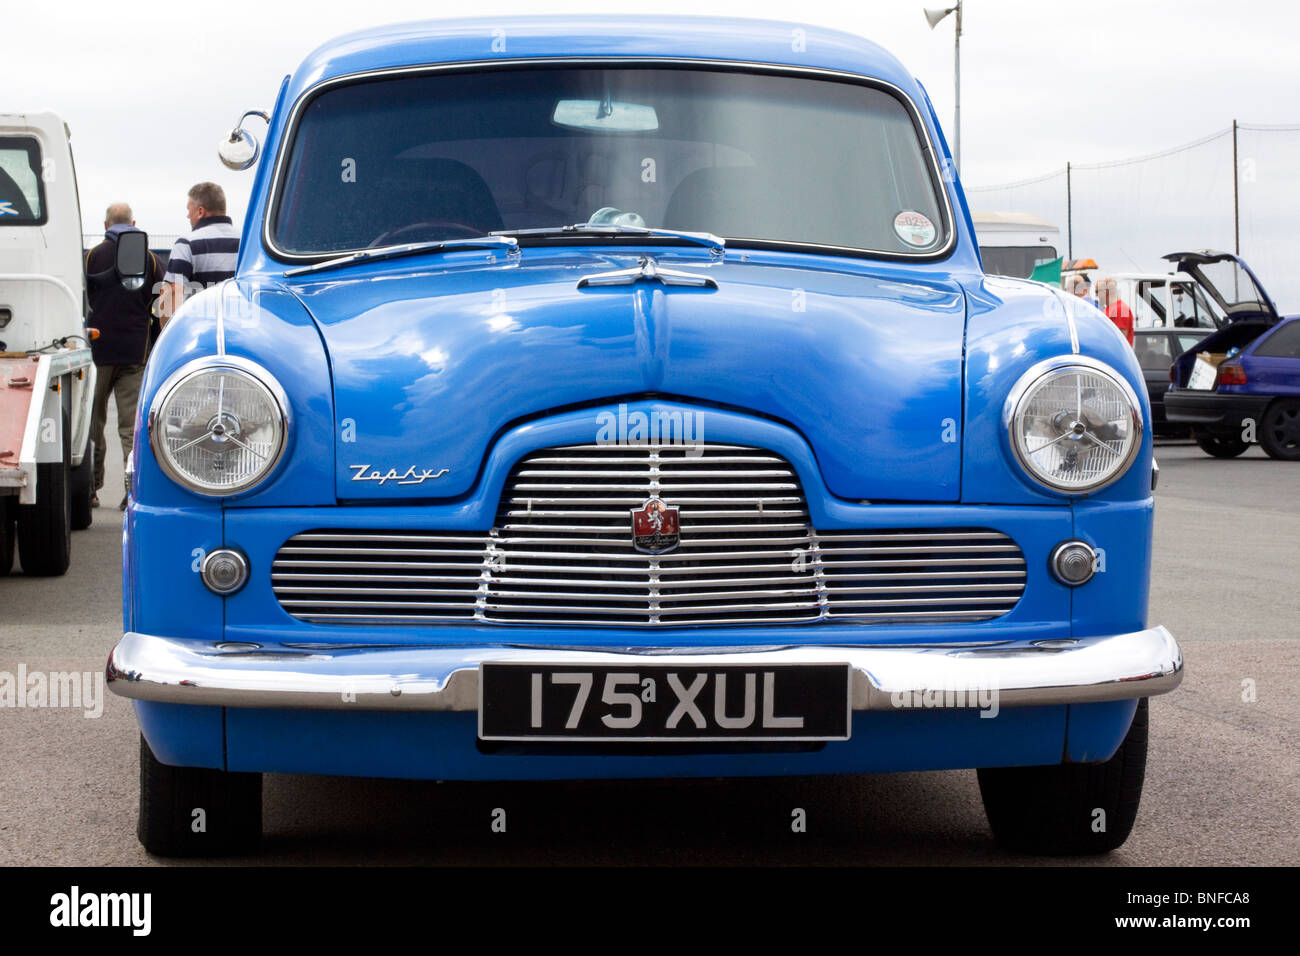 Picture of a Zephyr Classic Car at the Retro Show Stock Photo